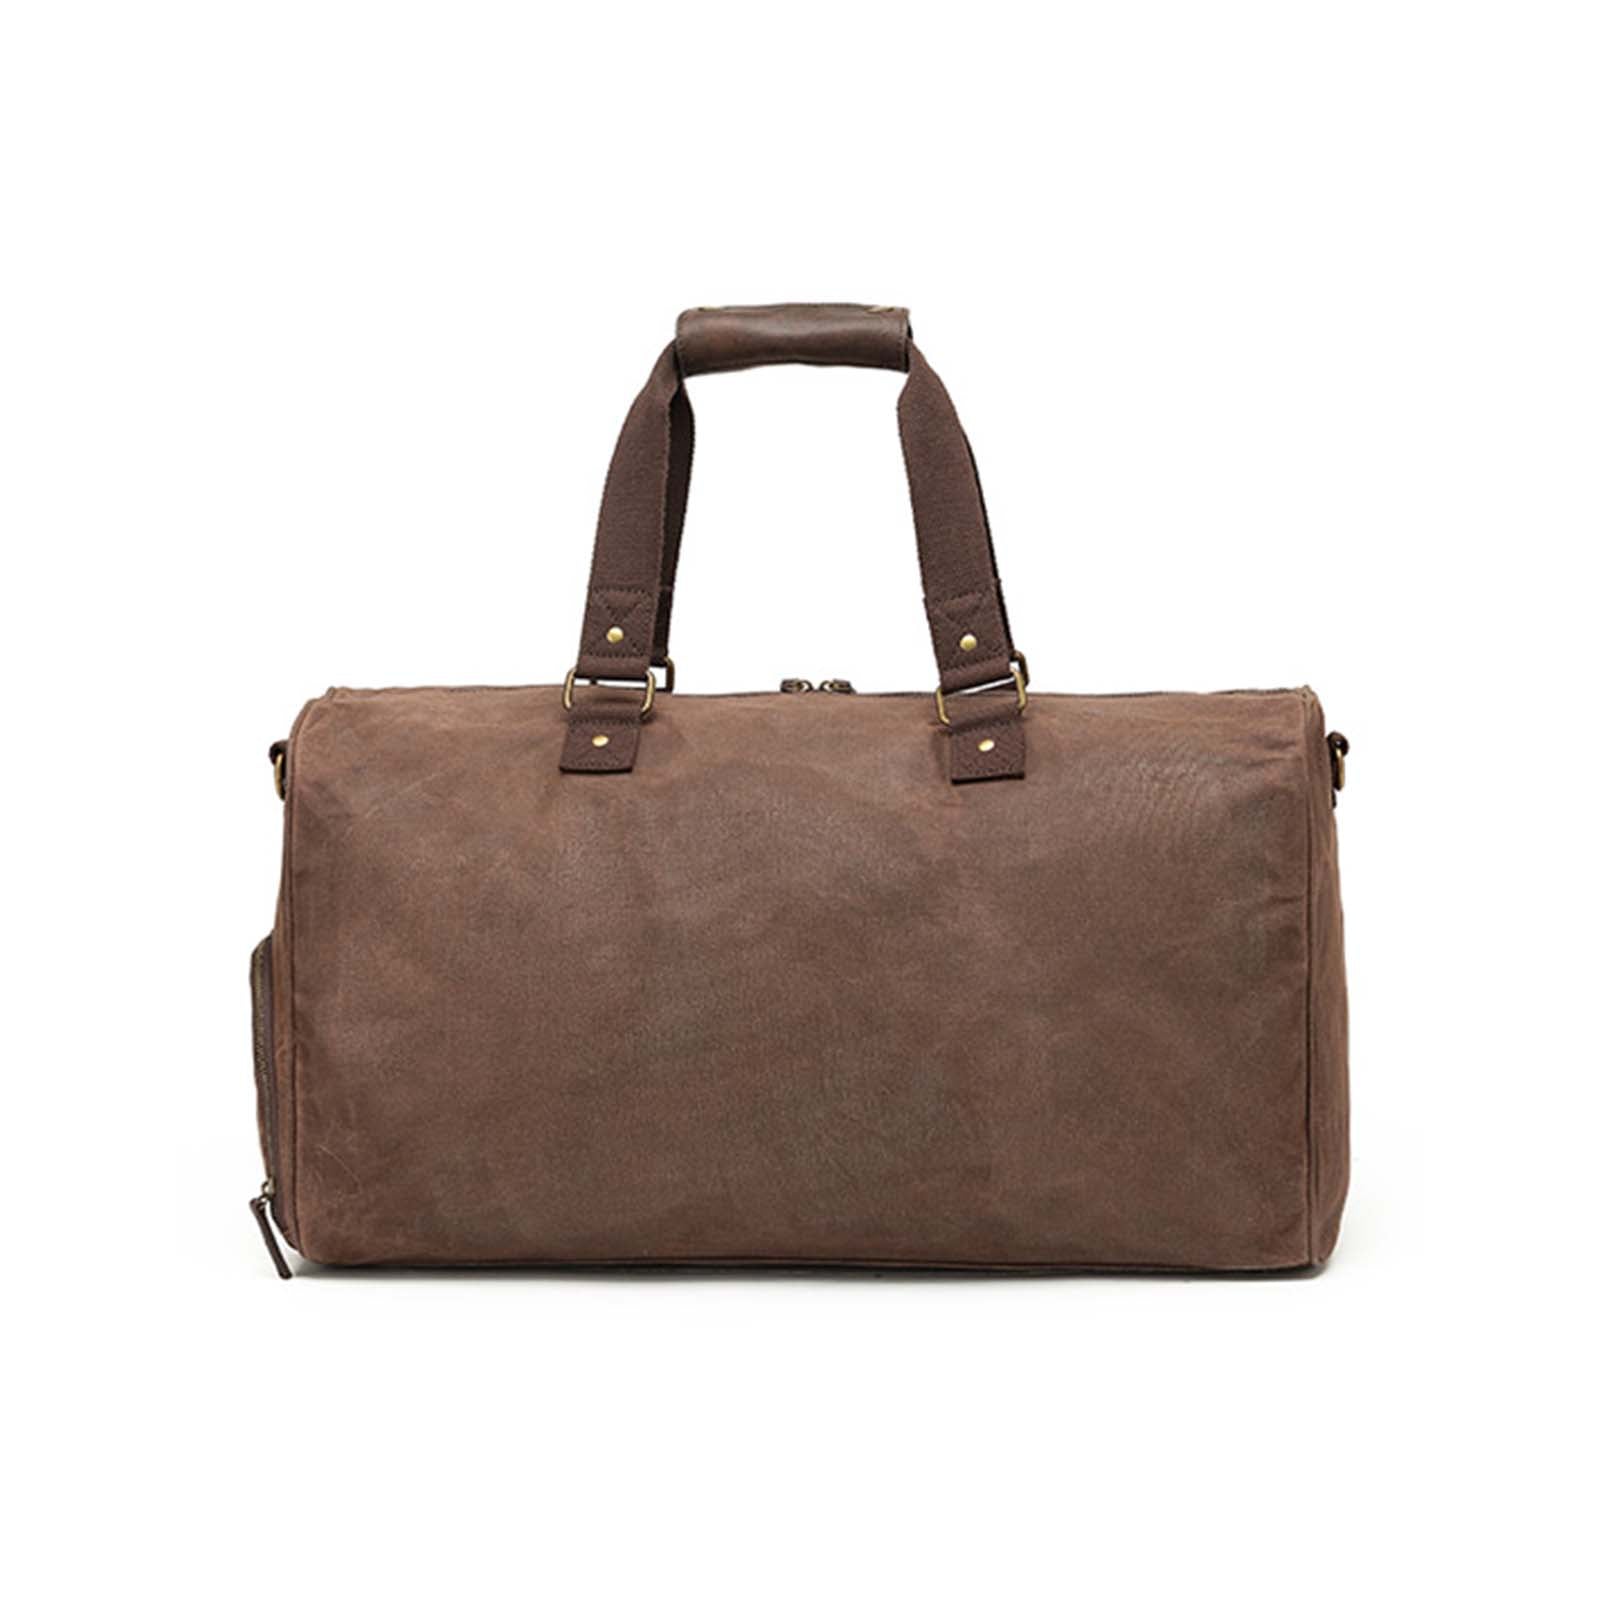 Tosca_Waxed_Canvas_Duffel_Bag_With_Pockets_Brown_Back.jpg